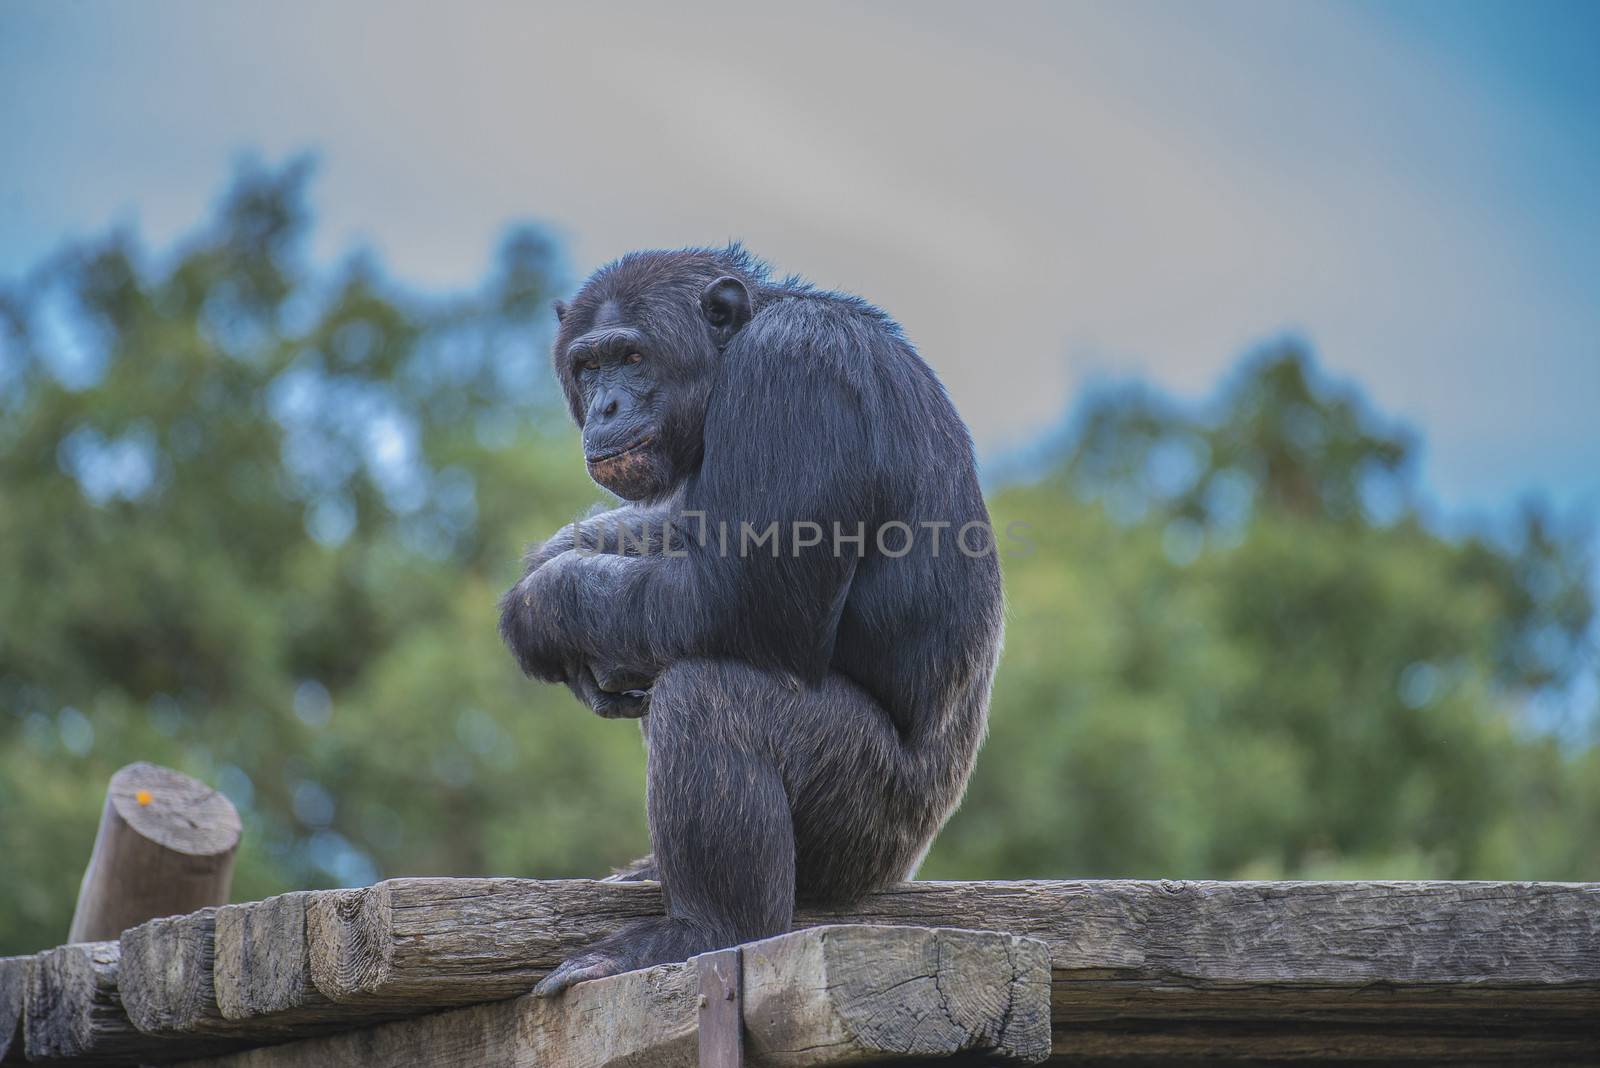 Chimpanzee, primatart in the human ape family. Is the species which, together with the dwarf chimpanzee (also called the bonobo), shows the greatest similarity with humans. Photo is shot 27/07/2013.